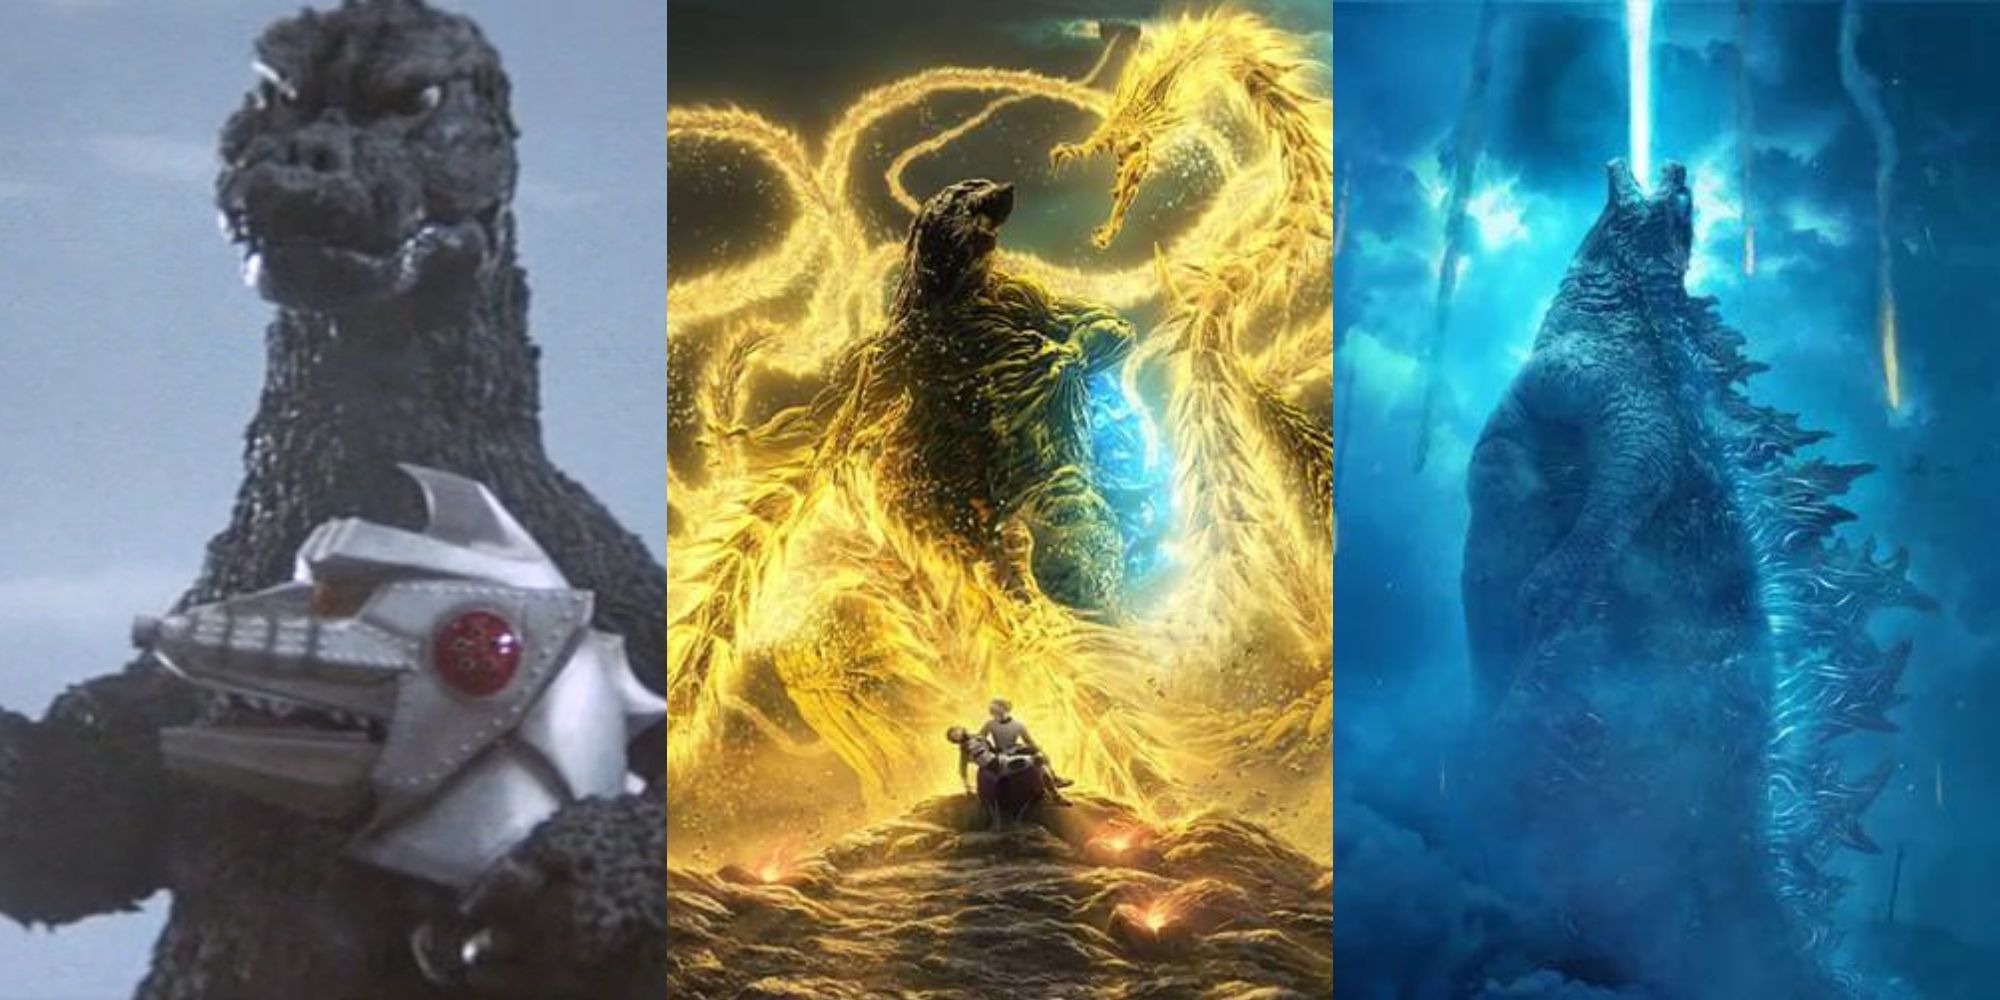 A collage of some of the most underappreciated Godzilla films: Terror of Mechagodzilla, The Planet Eater and King of the Monsters.